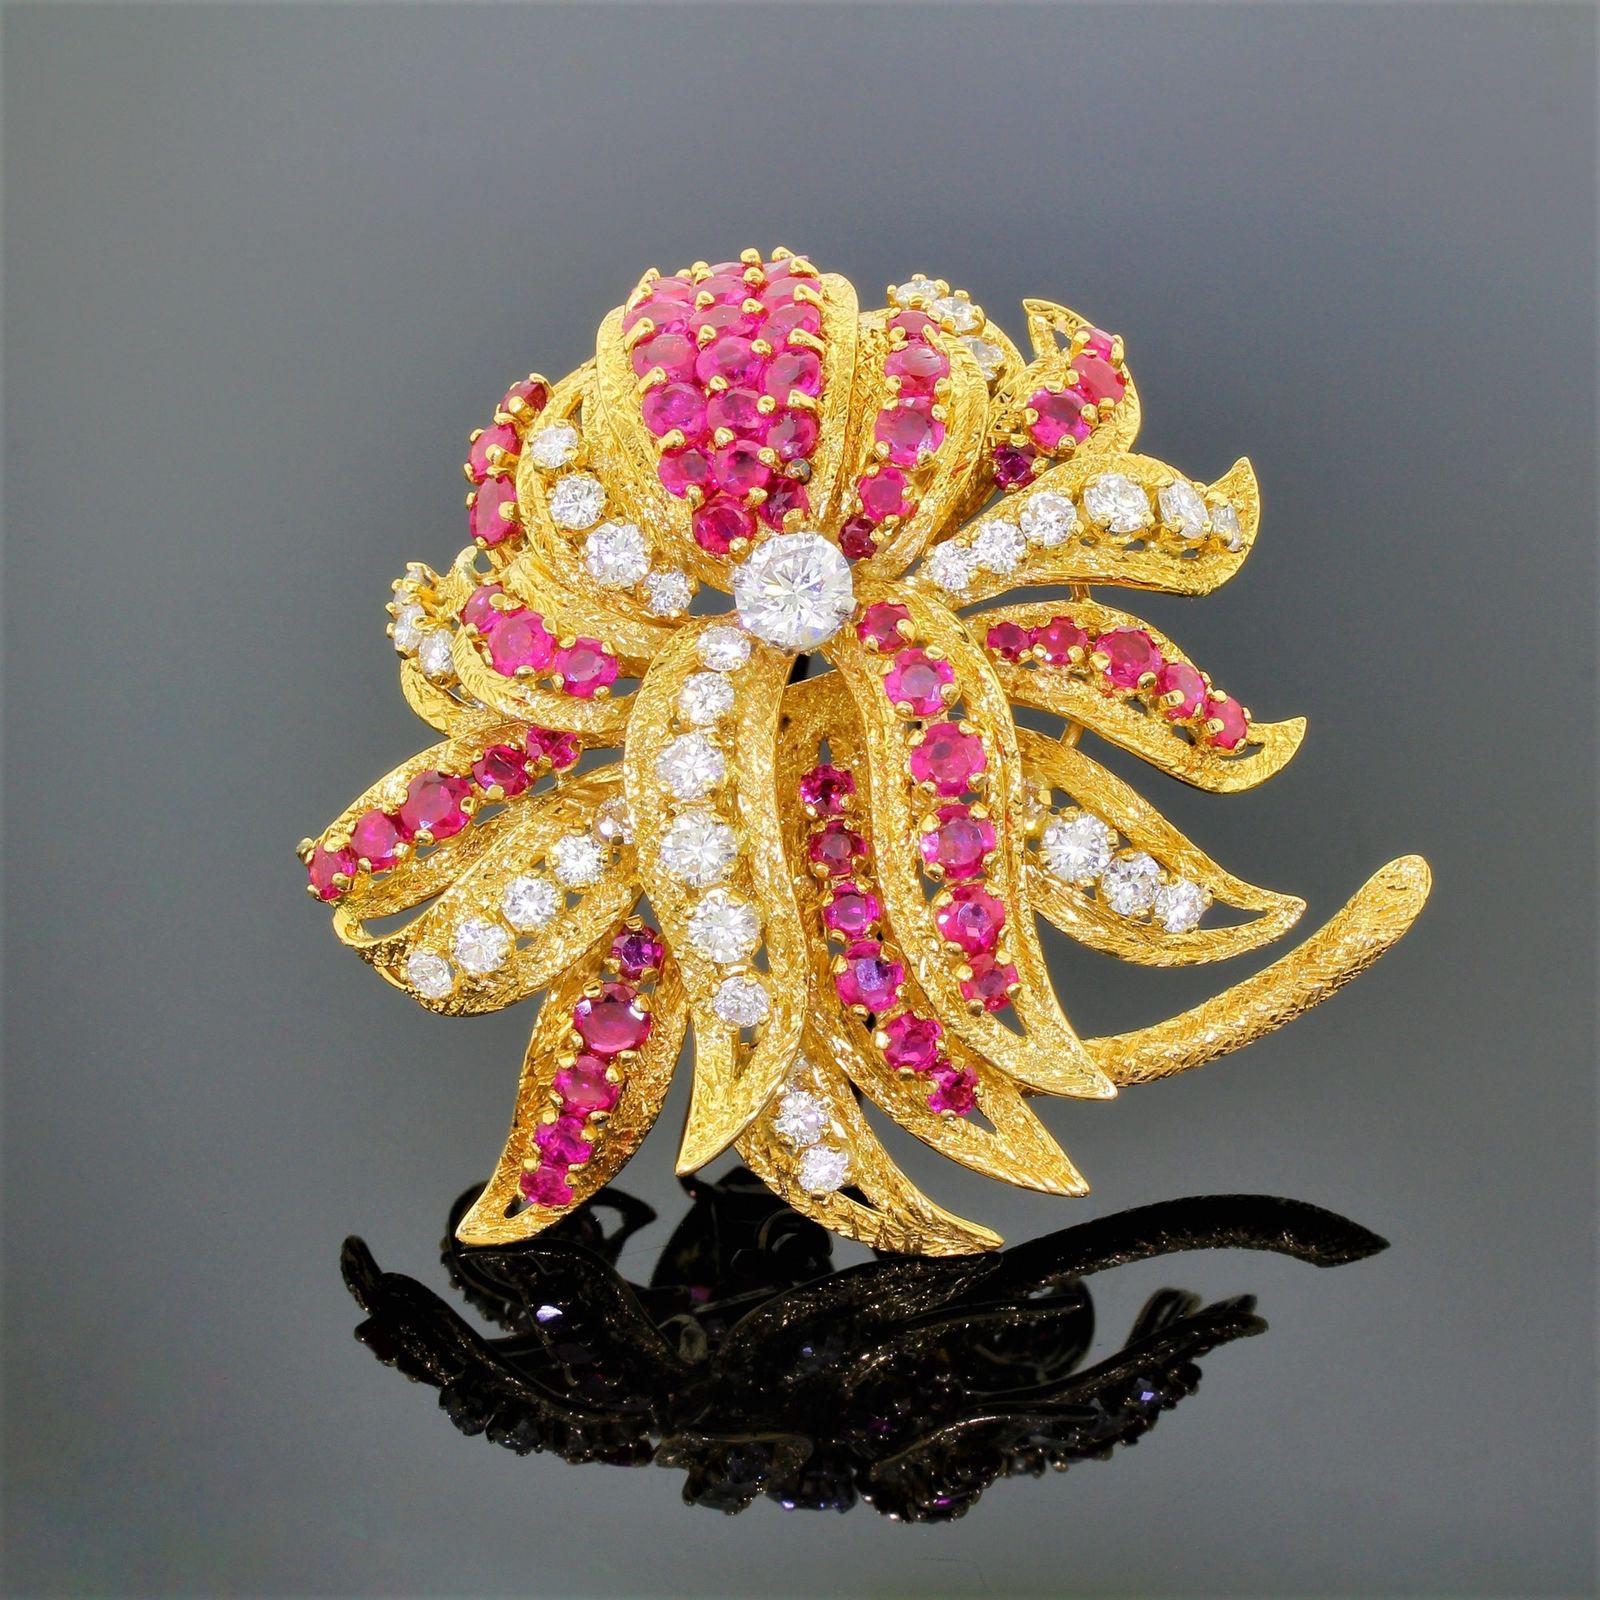 Kutchinsky Of London 18k Gold Diamond Ruby Floral Cluster Brooch 10.60 Carat  In Excellent Condition For Sale In Lauderdale by the Sea, FL